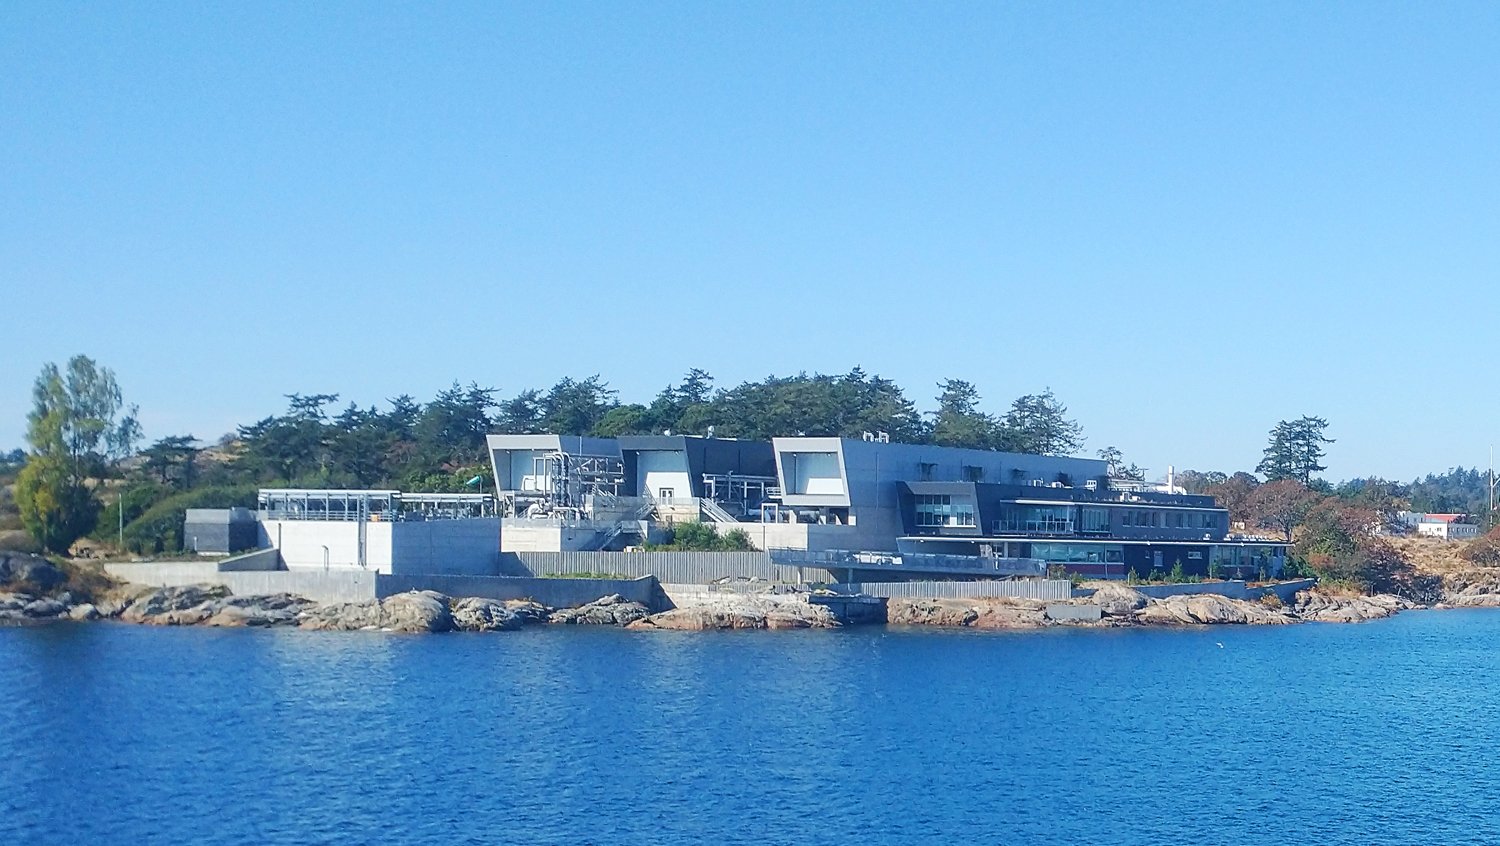 Back in Victoria! Look at this James Bond vilain mansion right off the ferry dock. 